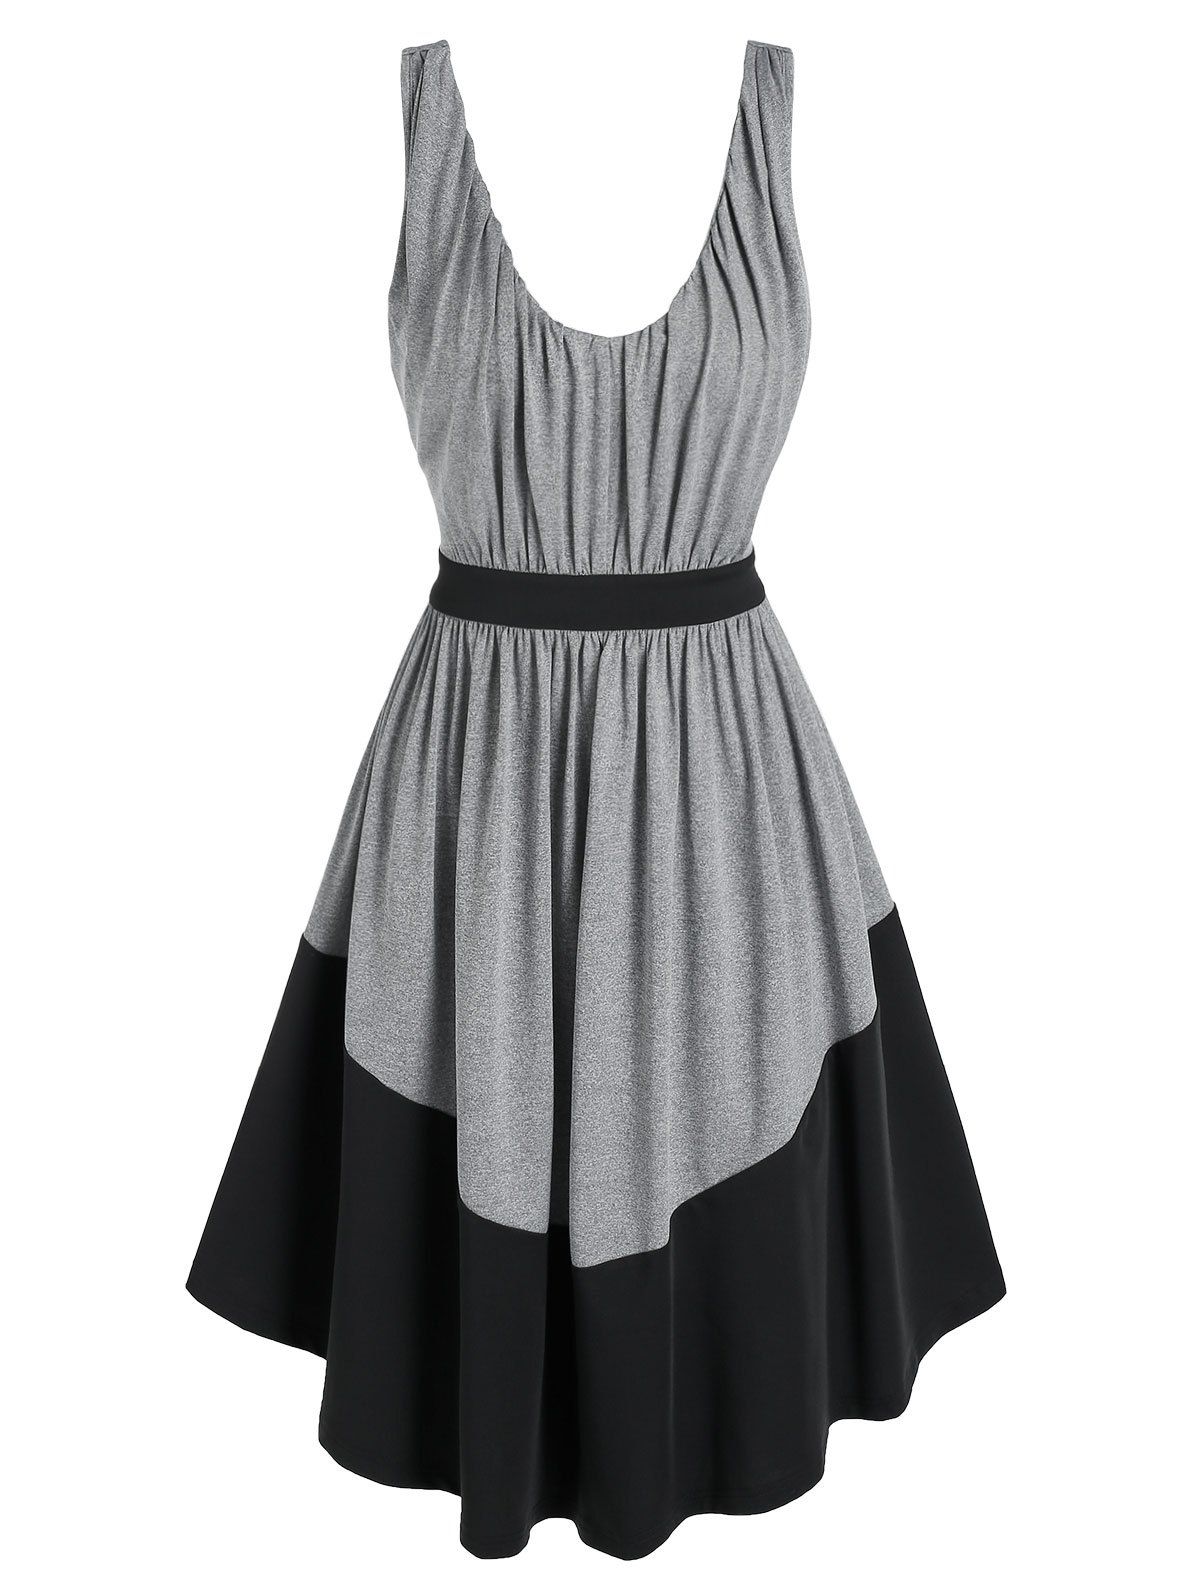 Colorblock Ruched Knee Length Dress - GRAY L